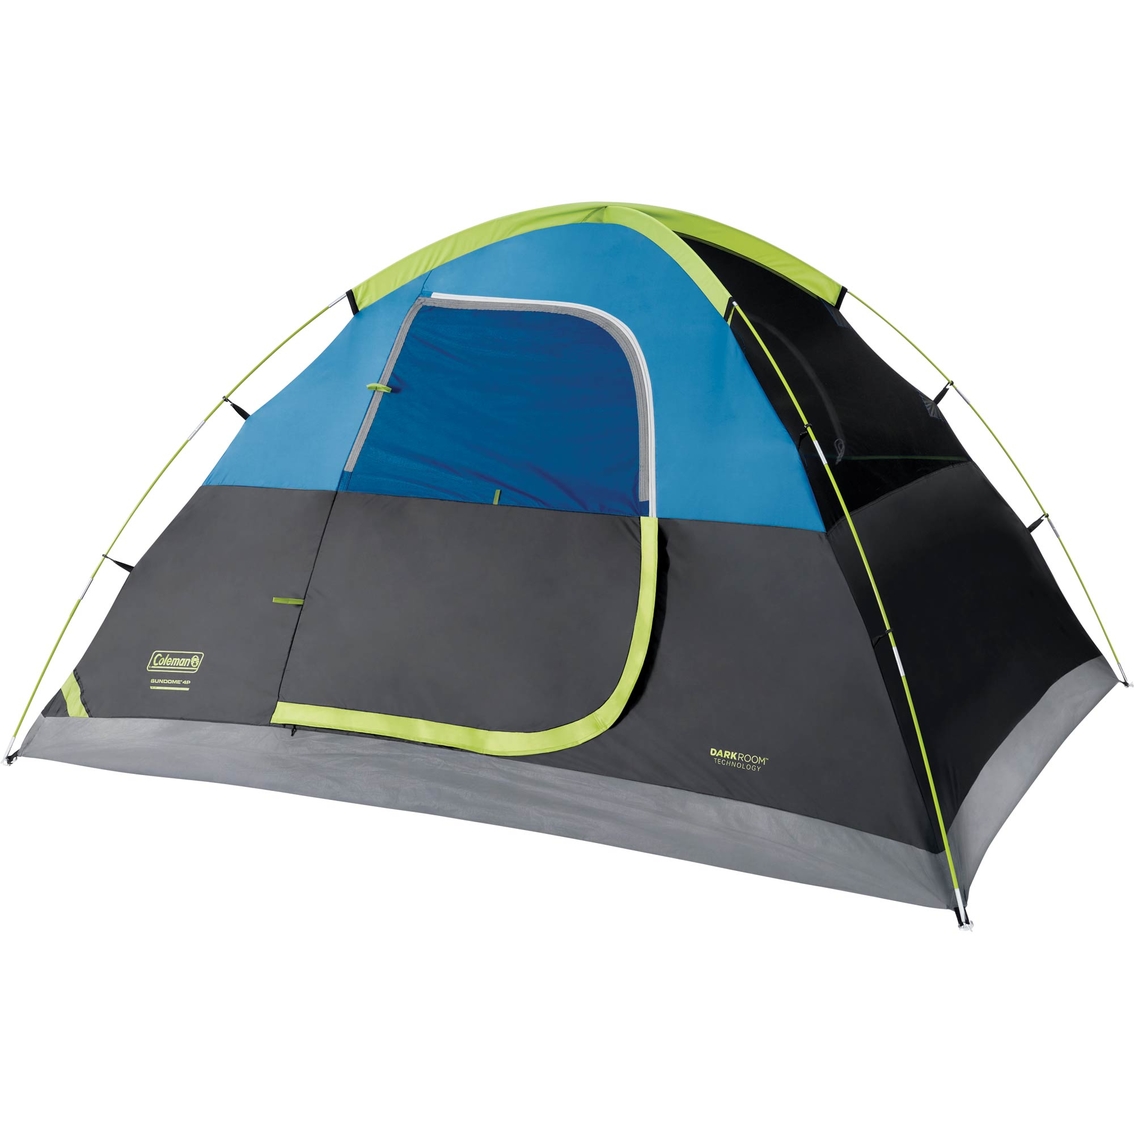 Coleman 4 Person Dark Room Sundome Tent | Tents | Father's Day 